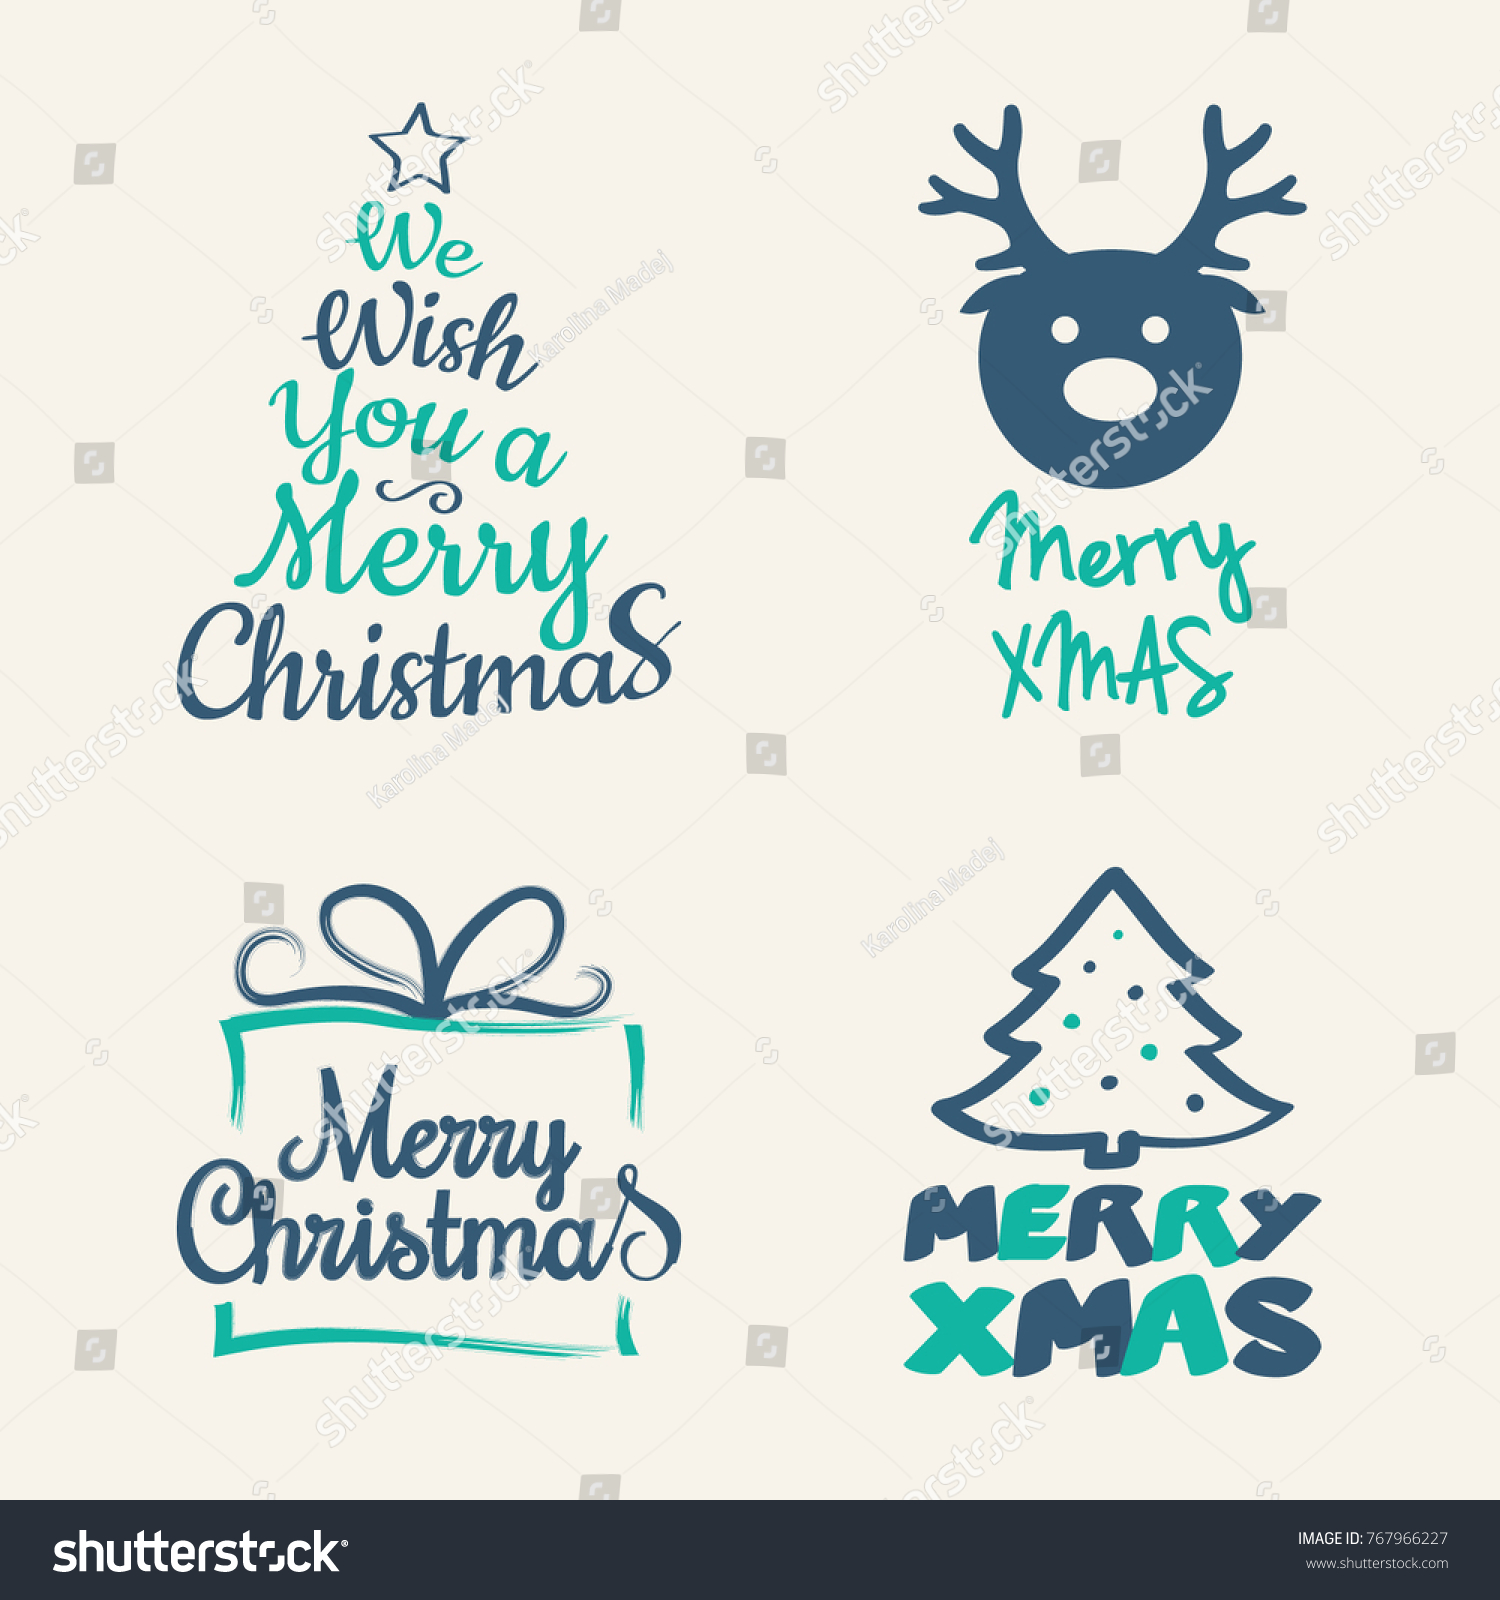 Cute Christmas icons with wishes collection Vector